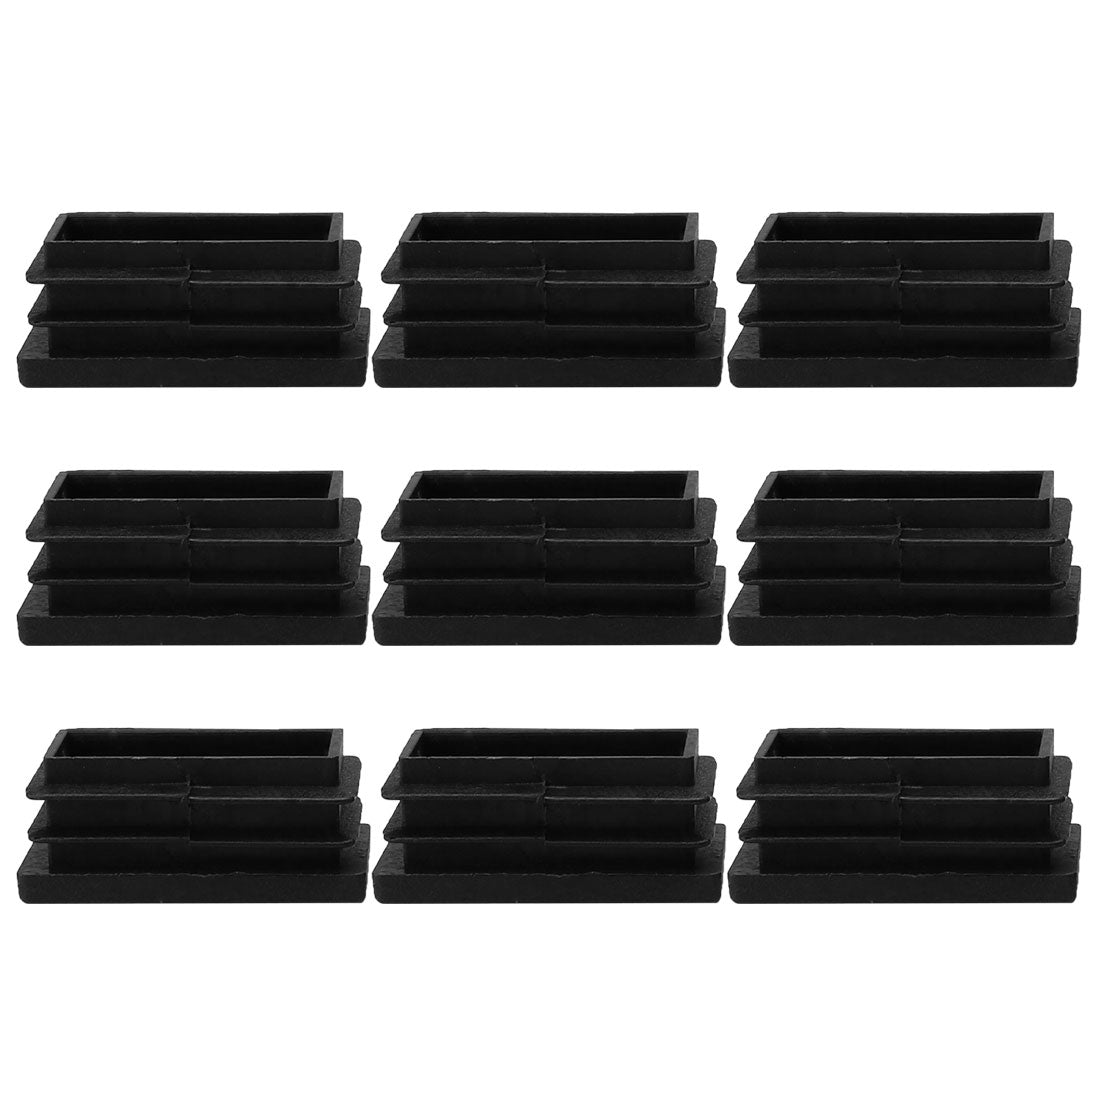 Uxcell Uxcell 9pcs Plastic Rectangle 20 x 40mm Ribbed Tube Inserts Pipe Tubing End Cover Caps Furniture Glide Table Feet Floor Protector Black